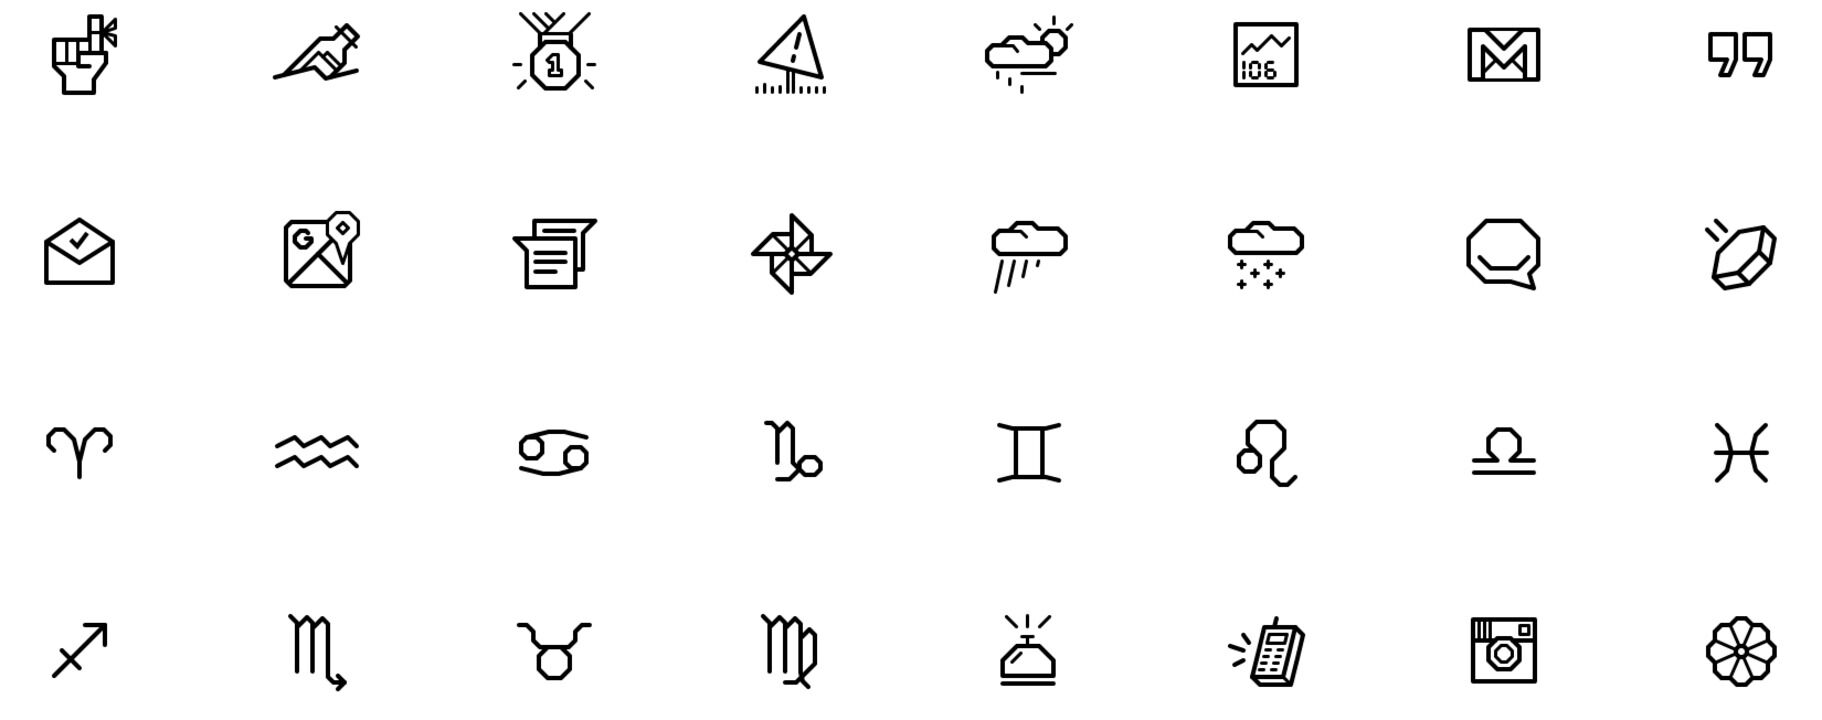 Many various icons for apps, weather and watch functions